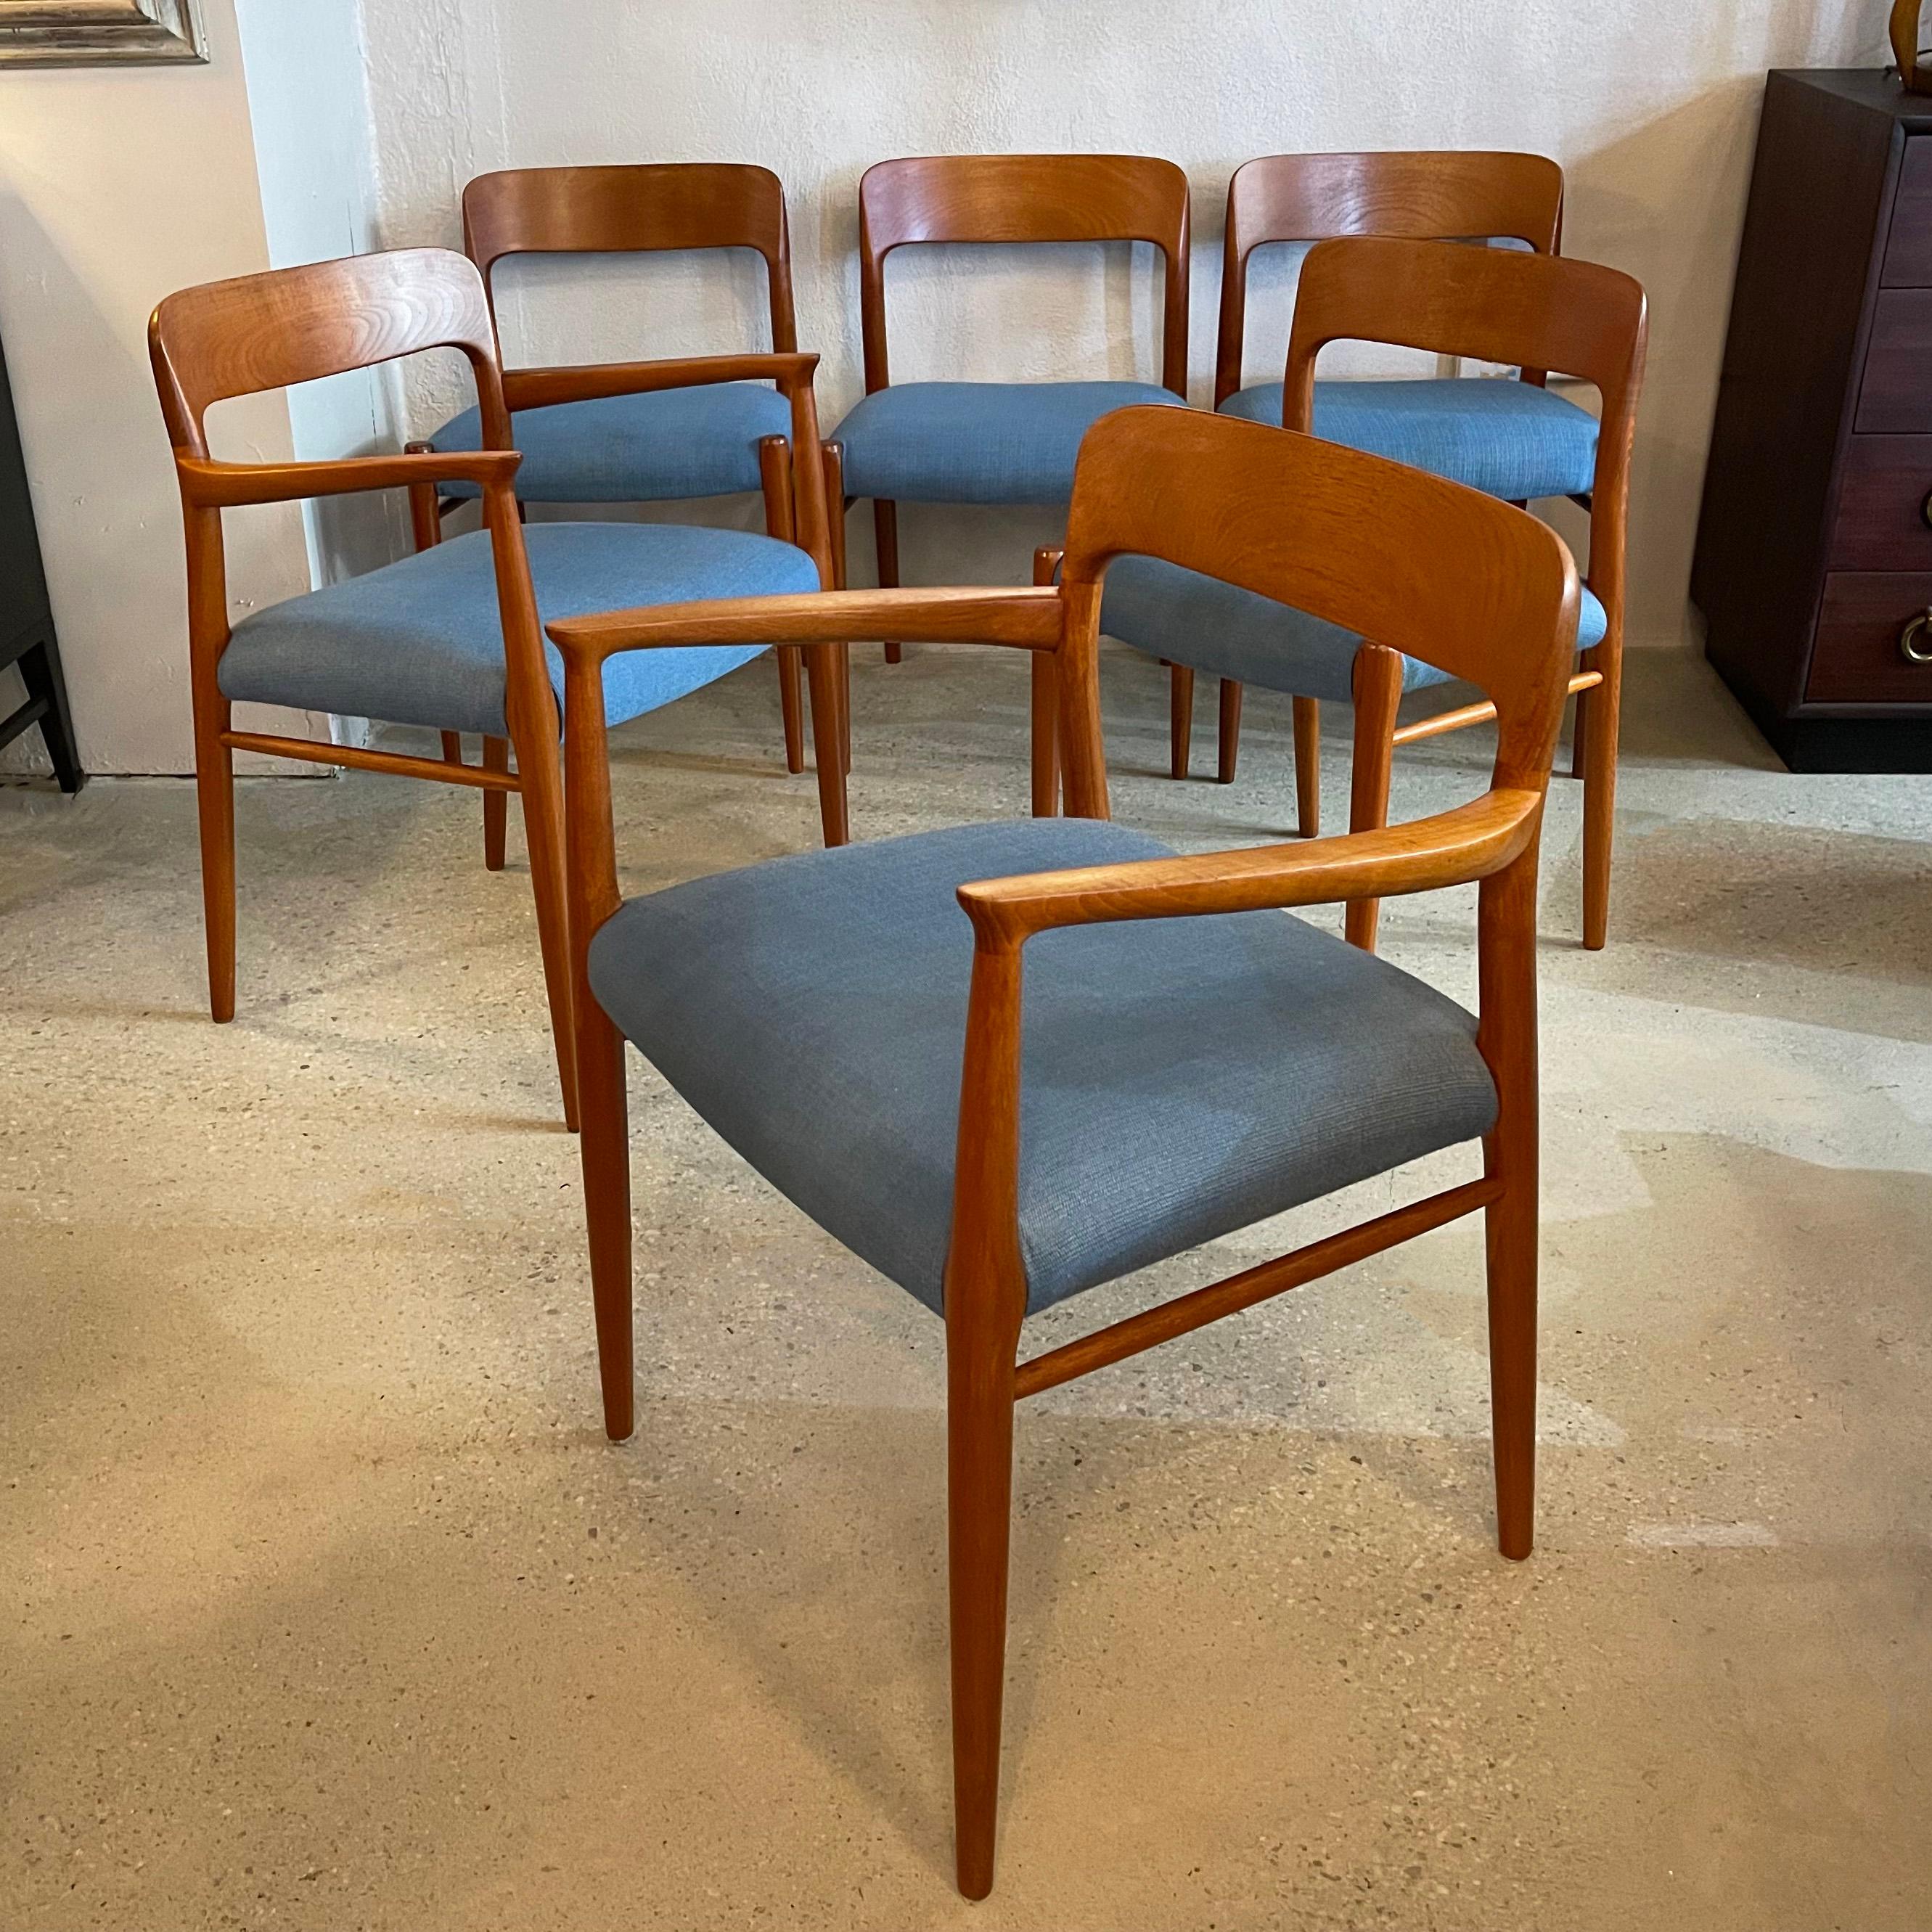 Set of six Scandinavian modern, model 75, teak dining chairs by Niels O Møller for J.L. Møllers Møbelfabrik consist of four side chairs and 2 captain armchairs. The rich honey tone teak frames contrast beautifully with the azure blue, linen blend,